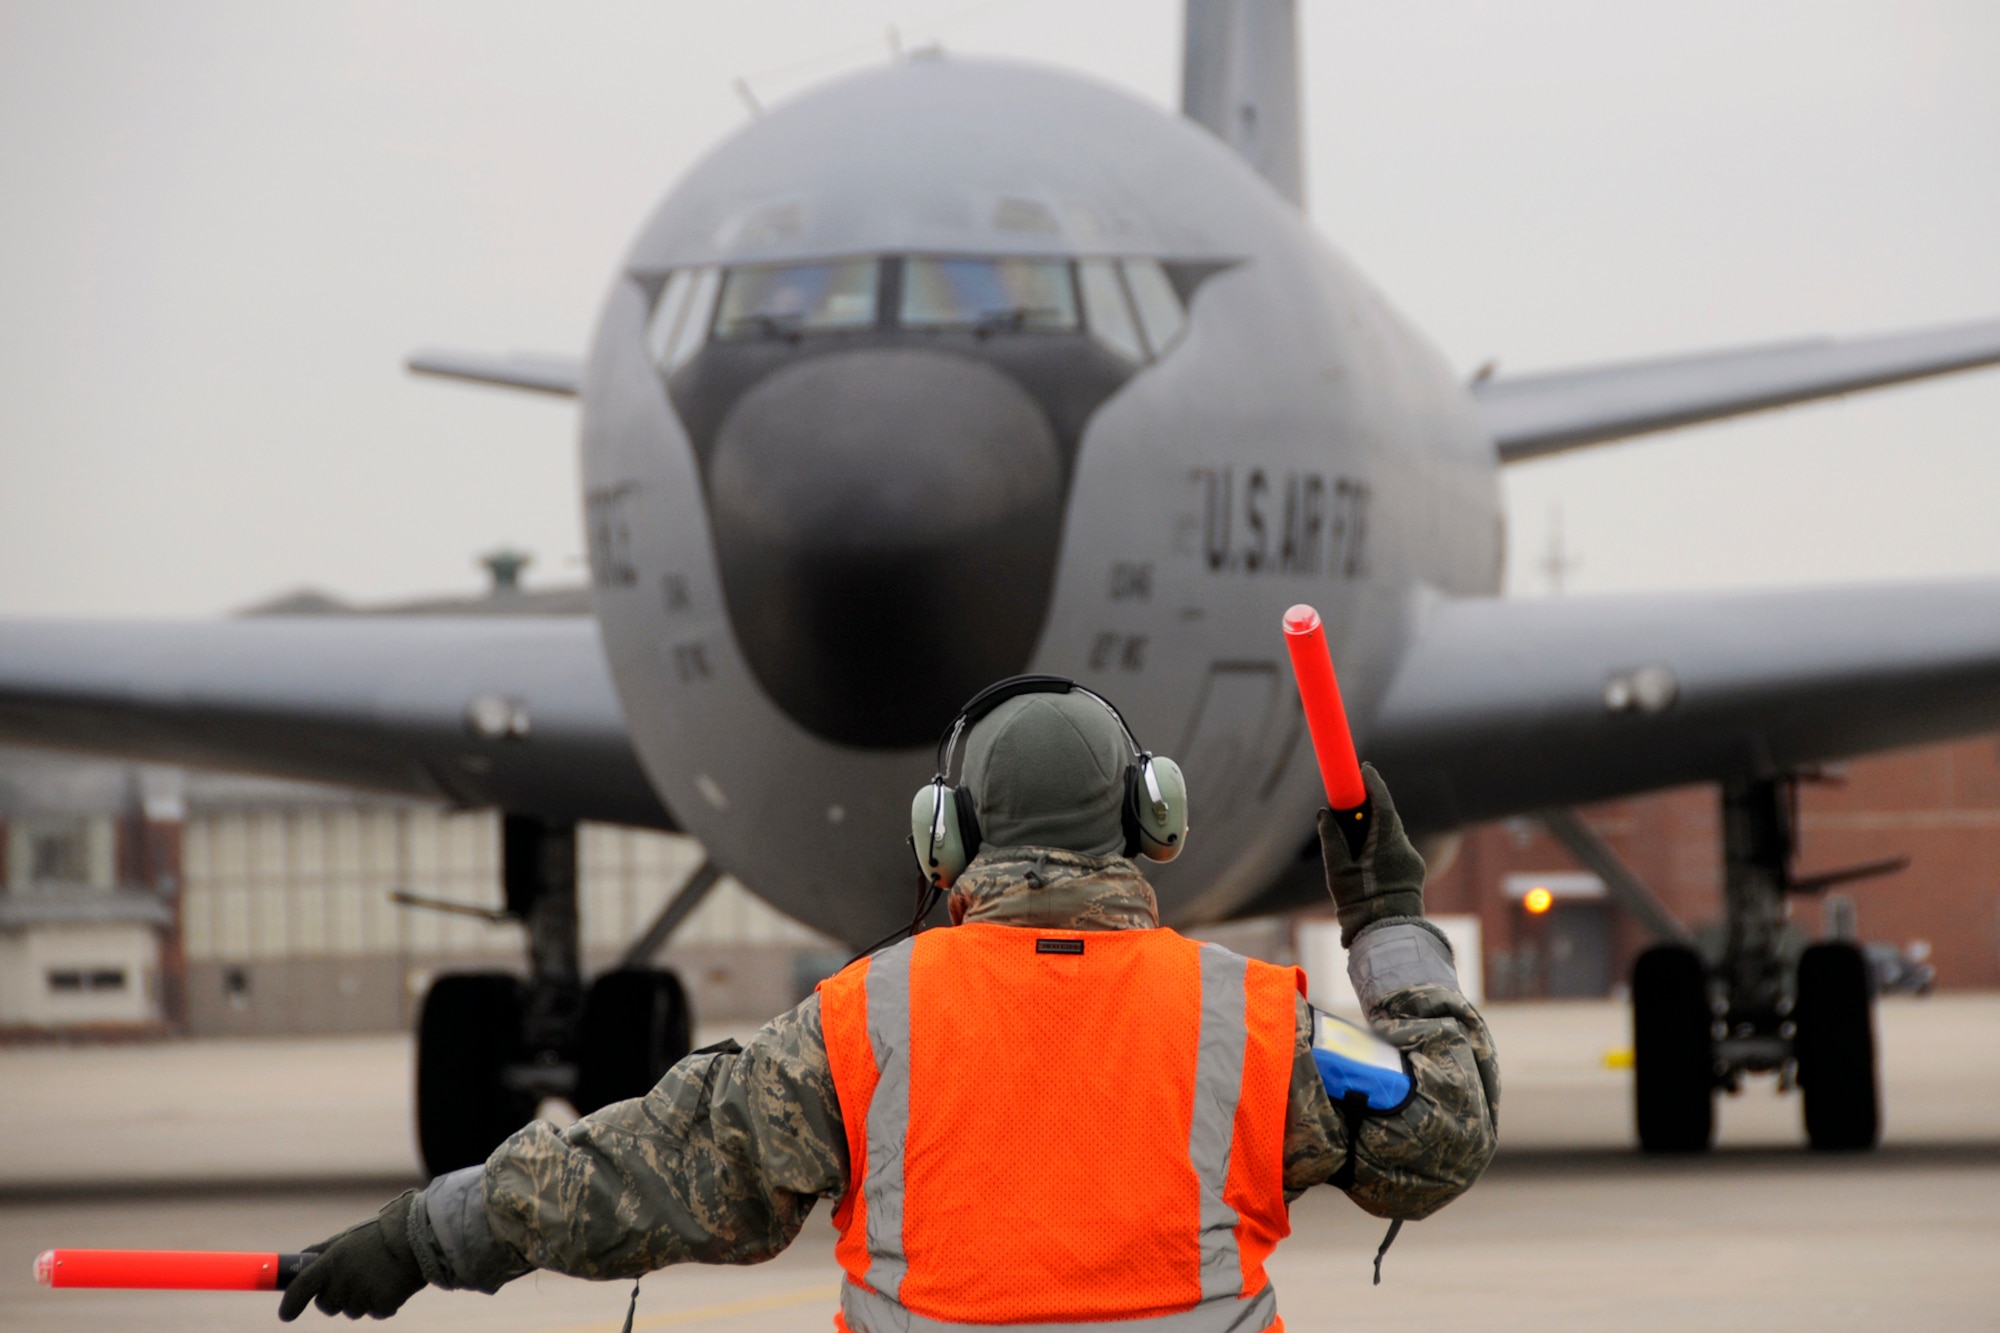 A crew chief with the 191st Aircraft Maintenance Squadron marshals a KC-135 Stratotanker aircraft toward the runway prior to a mission at Selfridge Air National Guard Base, Mich., Dec. 3, 2011. Crew chiefs perform and coordinate a wide variety of maintenance tasks and prepare the aircraft for flight. (U.S. Air Force photo by TSgt. David Kujawa)